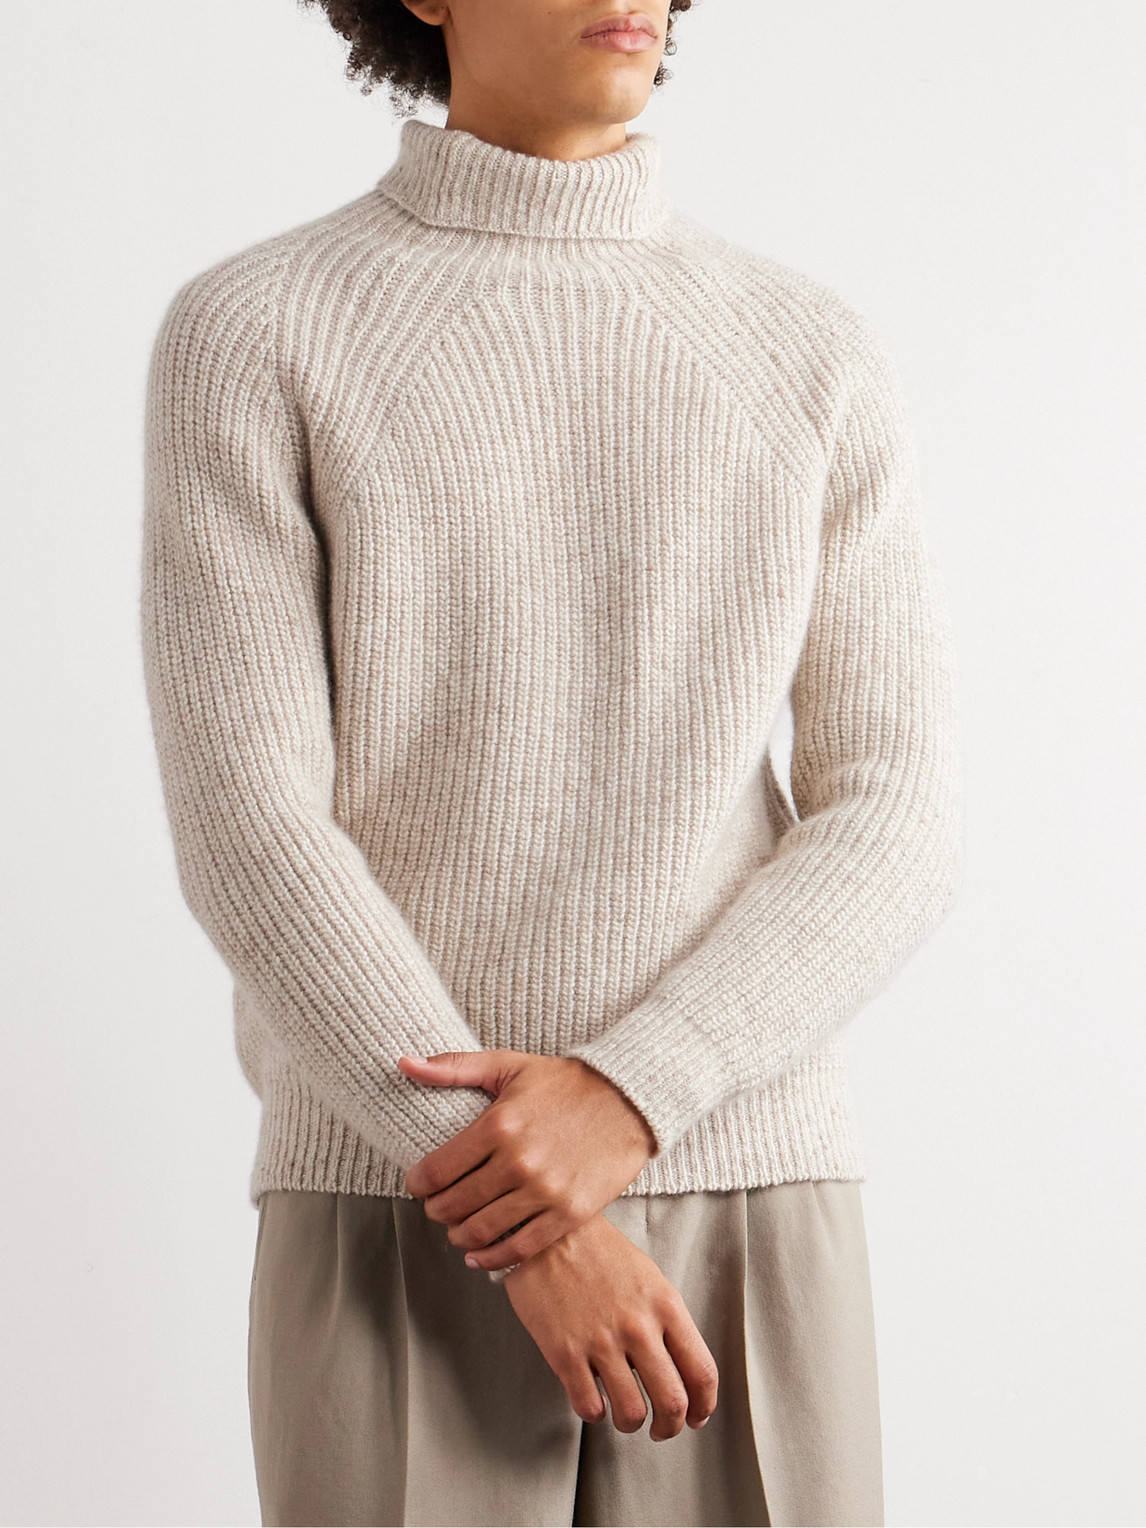 Shop Inis Meain Boatbuilder Ribbed Cashmere Rollneck Sweater In Neutrals